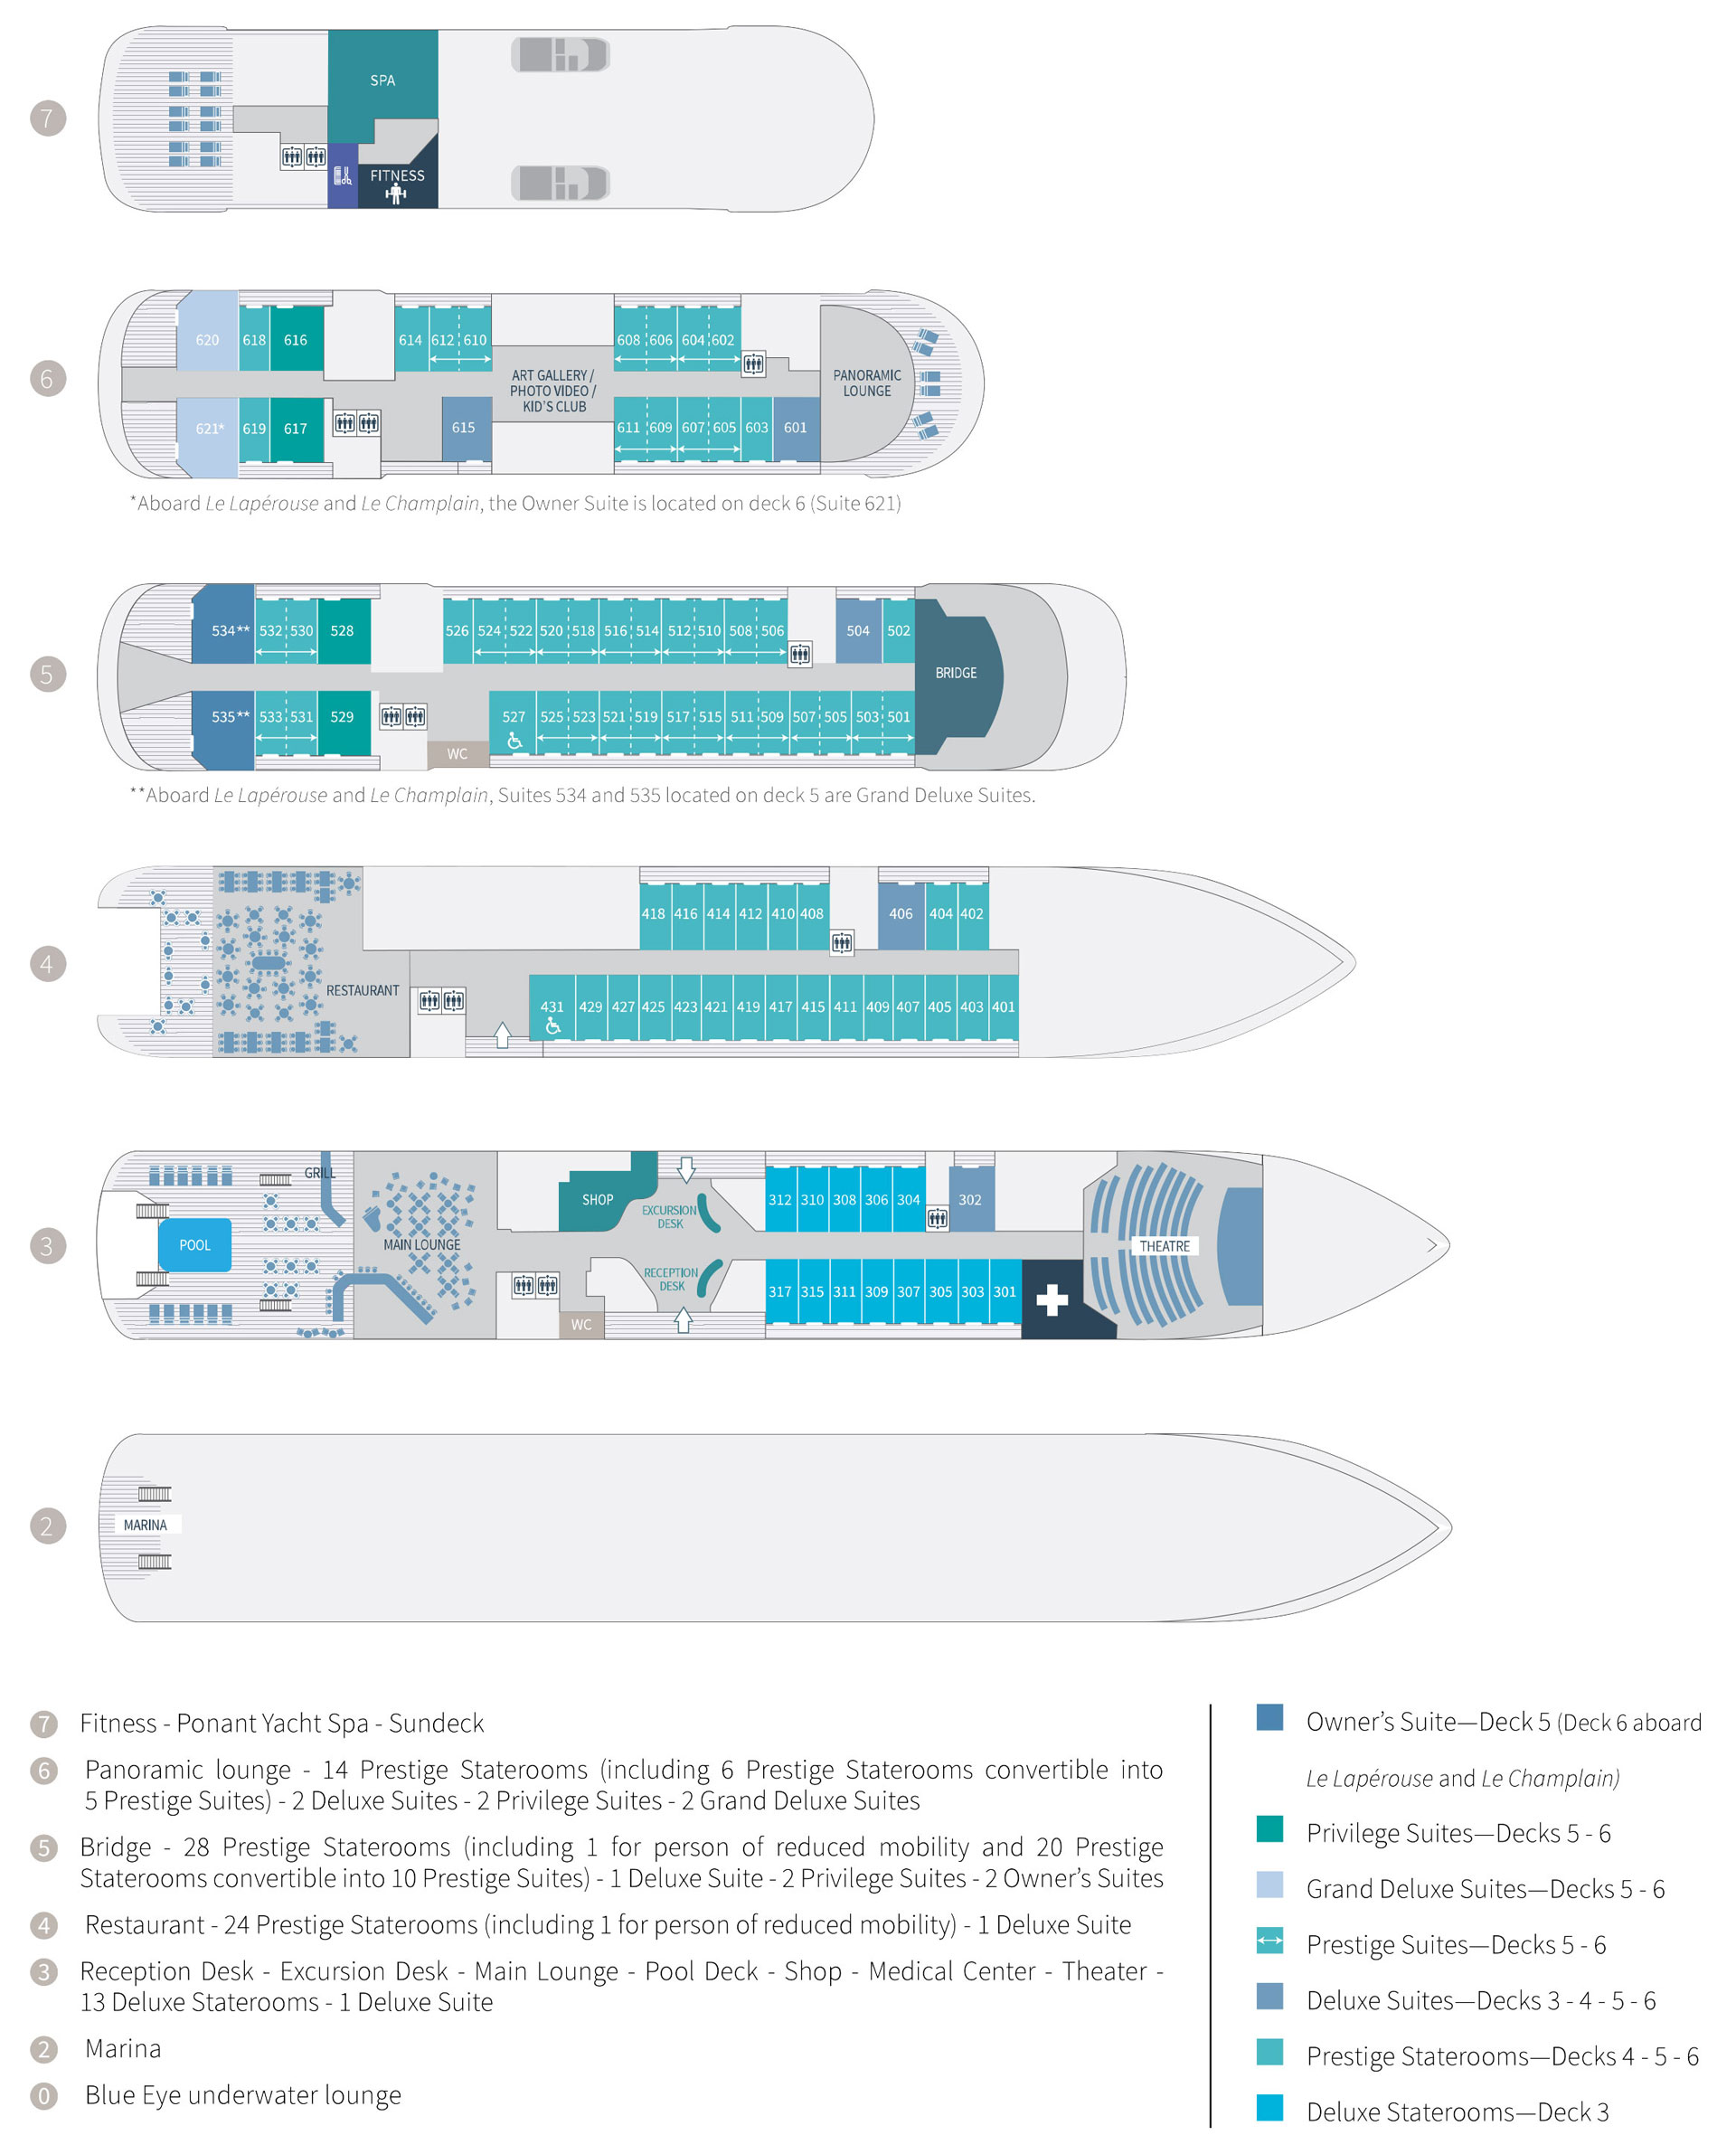 Deck plan of 184-guest Le Dumont D'Urville French luxury expedition ship, showing 4 passenger decks with 88 staterooms & 4 suites.